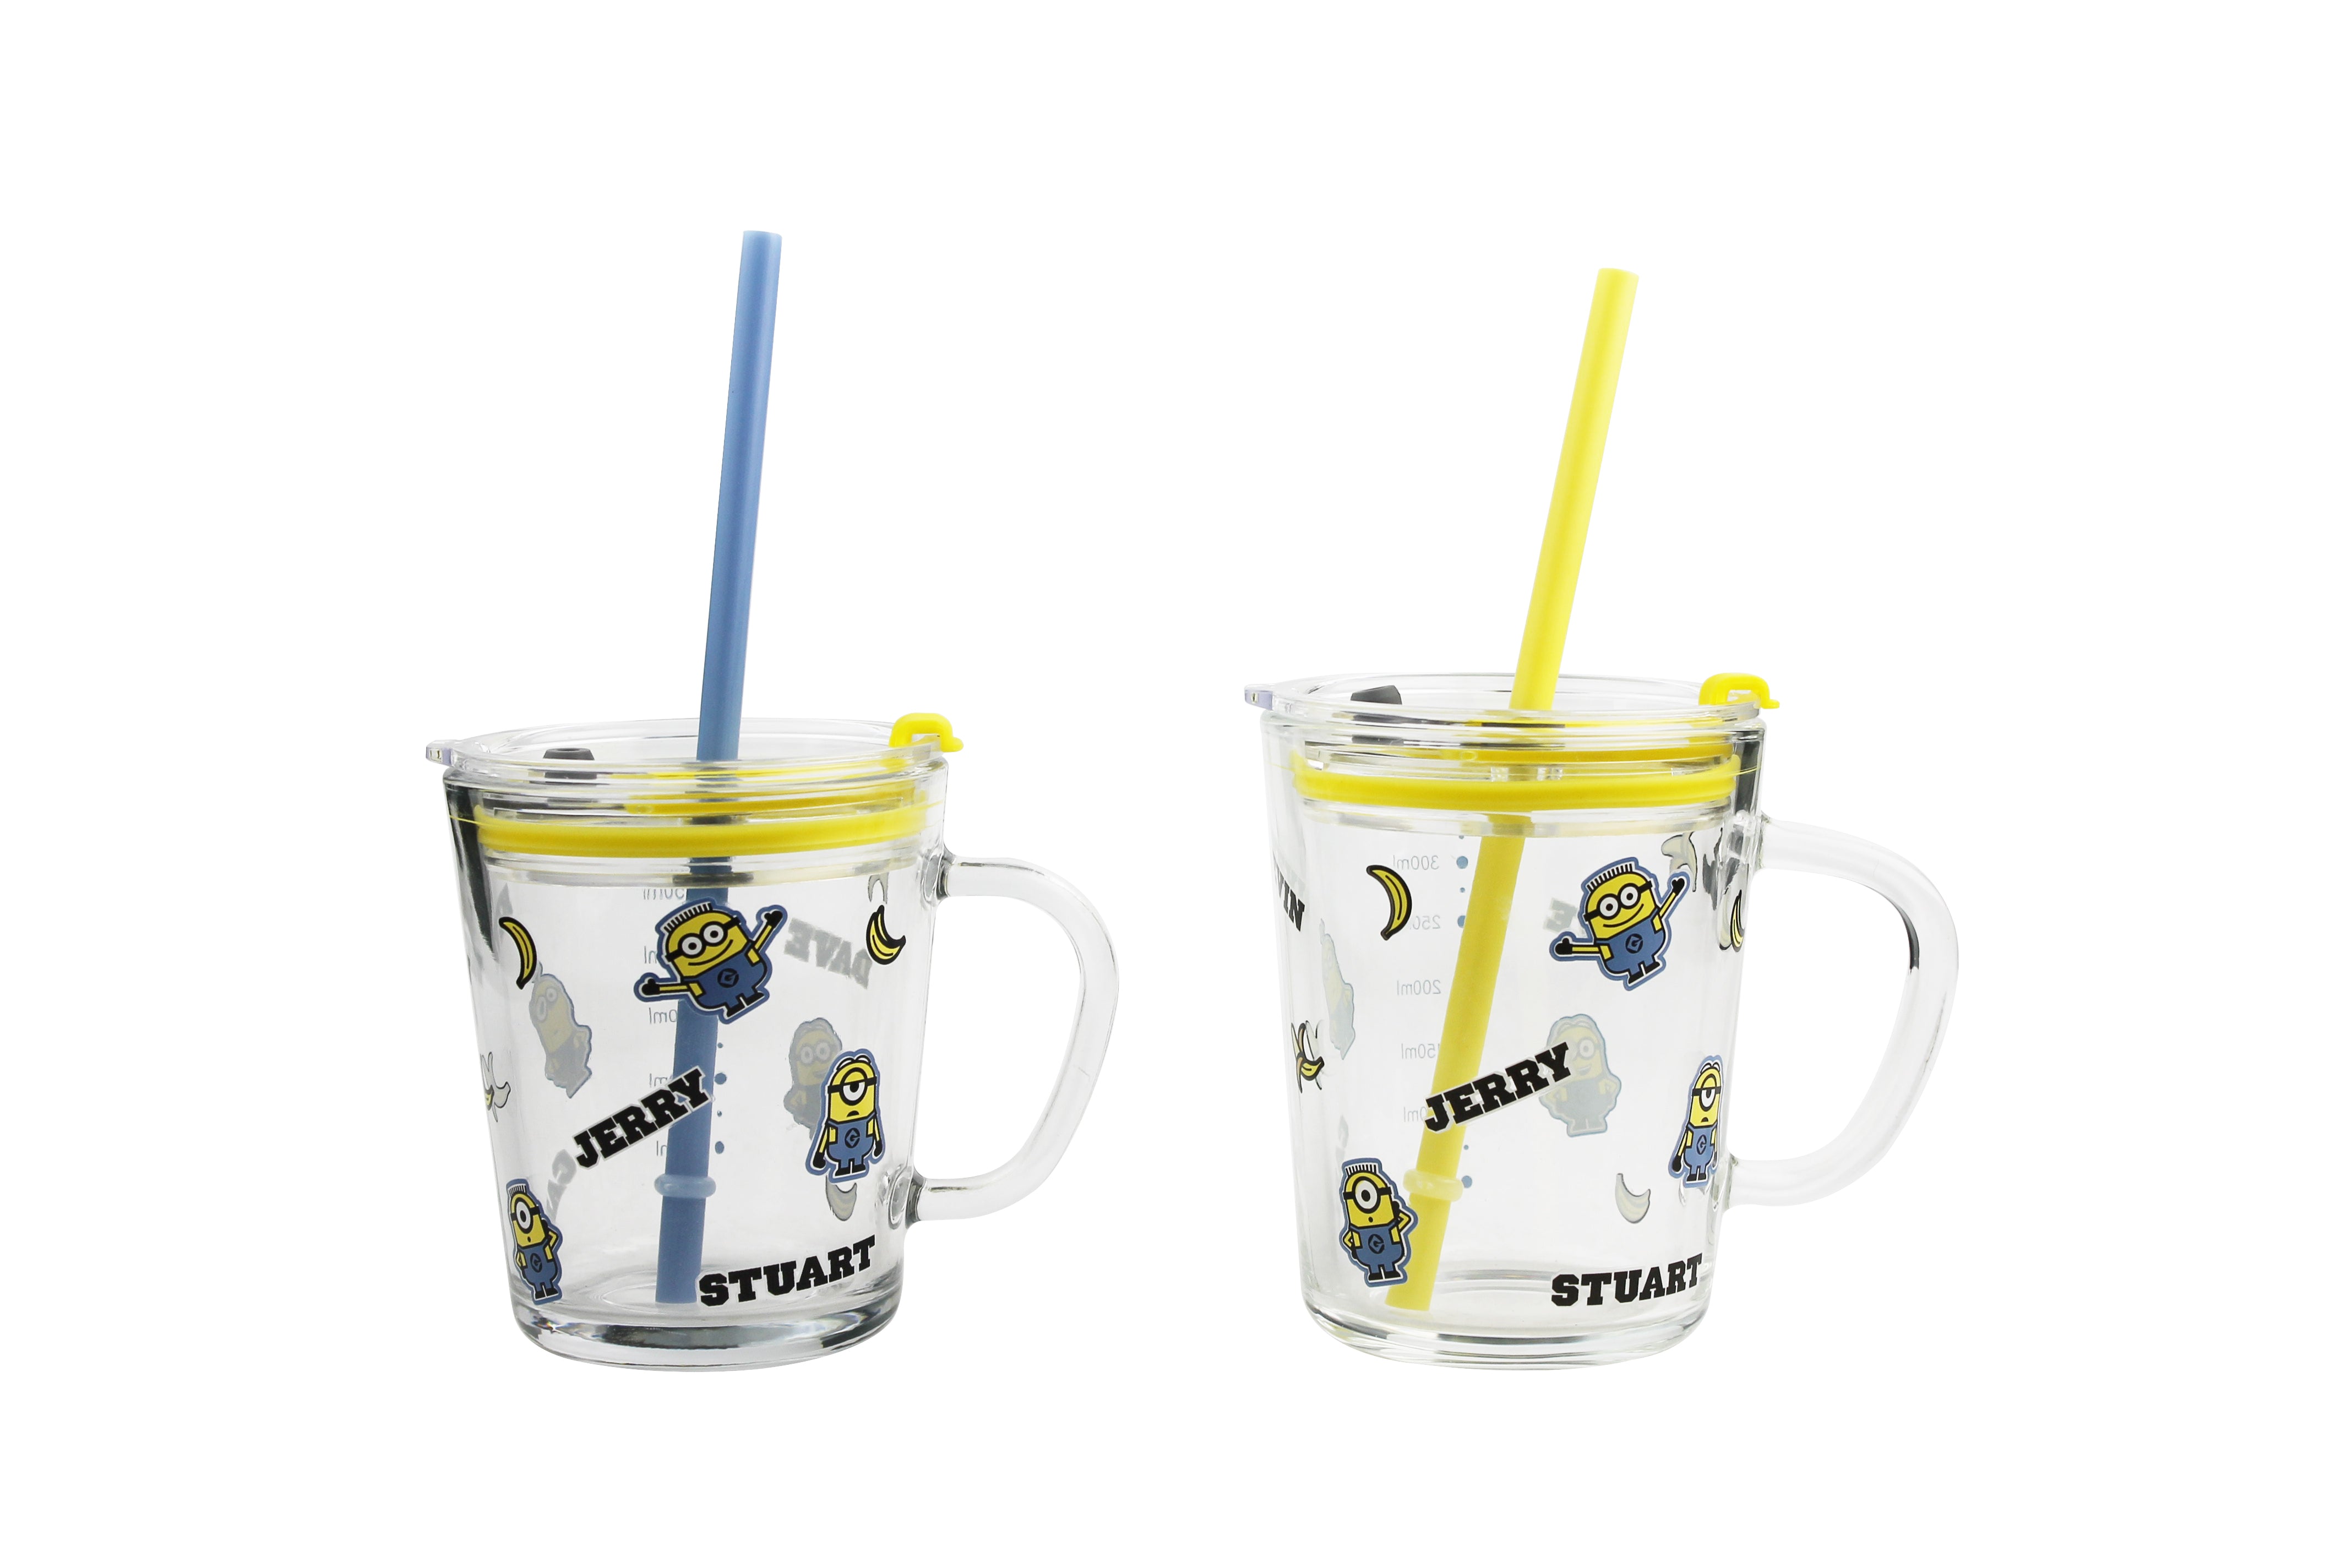 MINISO Minions Collection Plastic Water Bottle with Straw and Shoulder  Strap - 600mL Yellow Tumbler